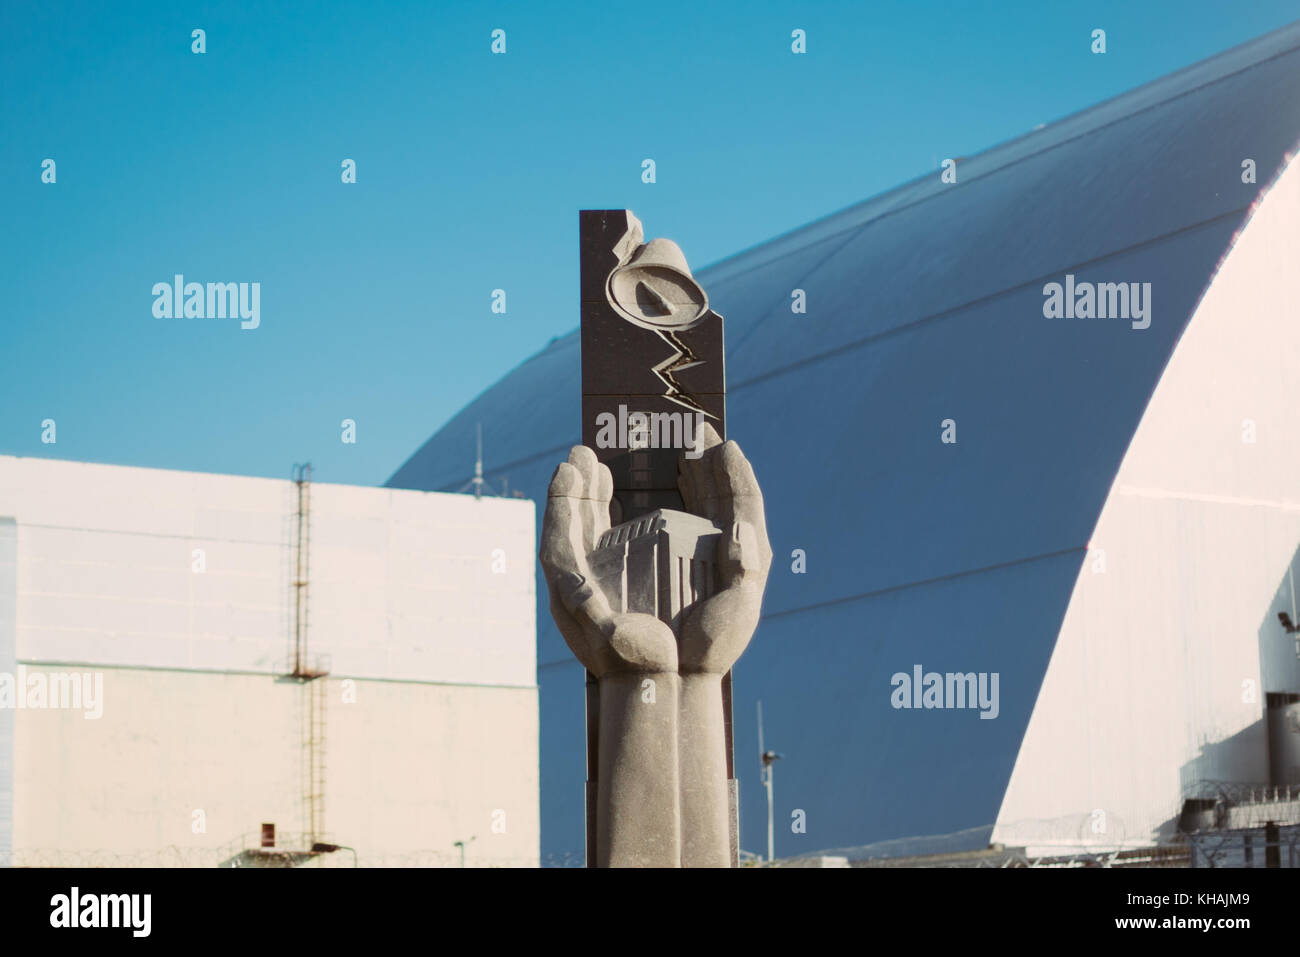 A memorial statue stands outside the Chernobyl power plant station dome (behind) in Ukraine Stock Photo